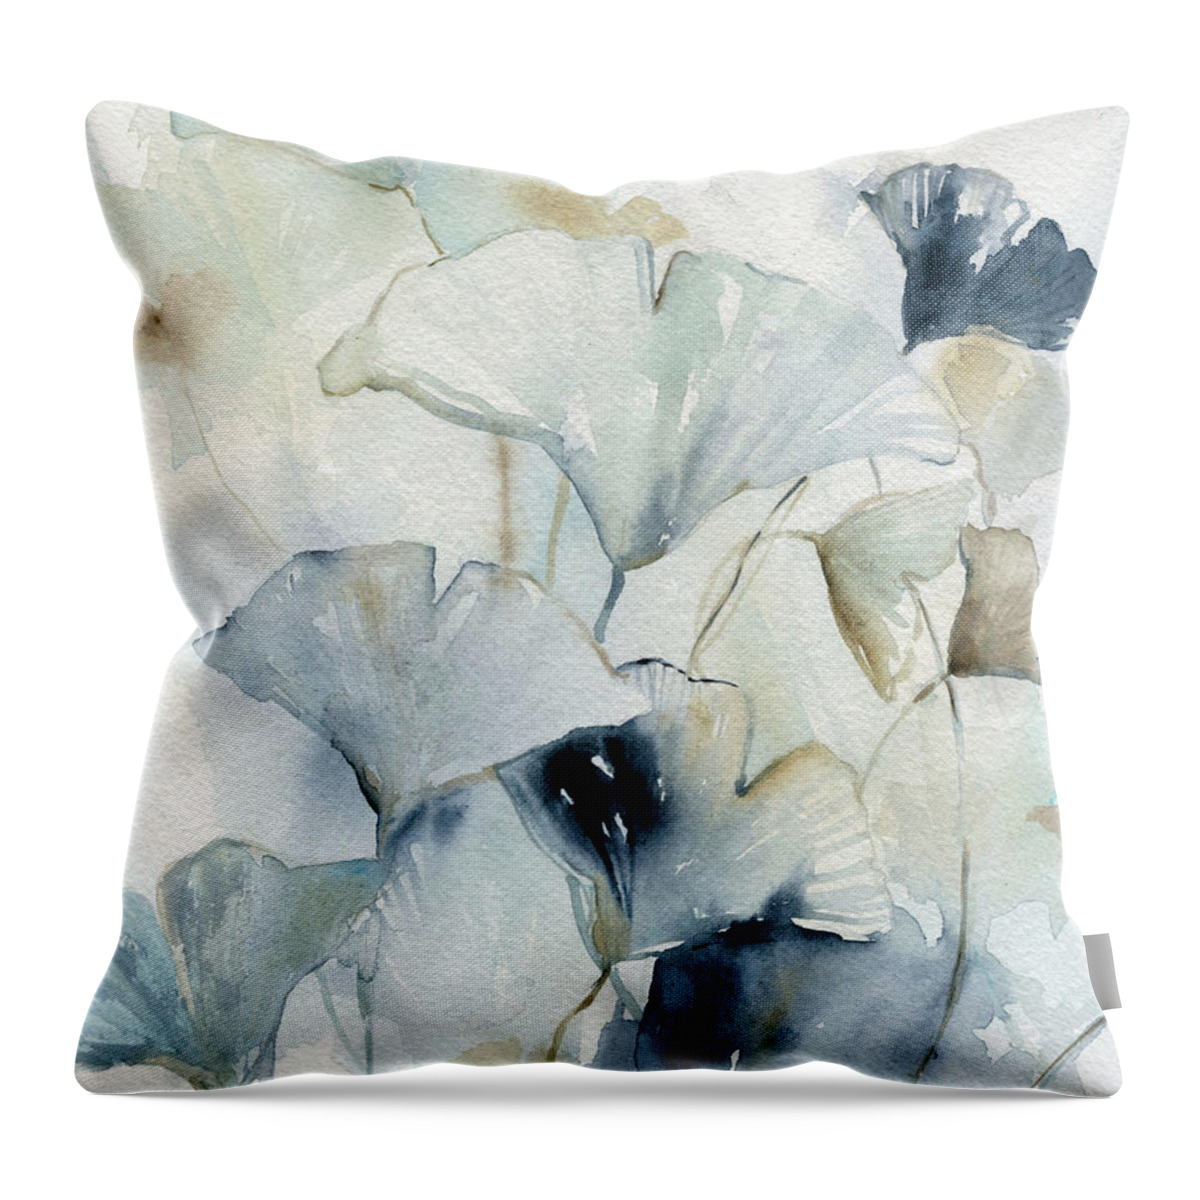 Watercolor Throw Pillow featuring the painting Gingko Leaves 1 by Carol Robinson